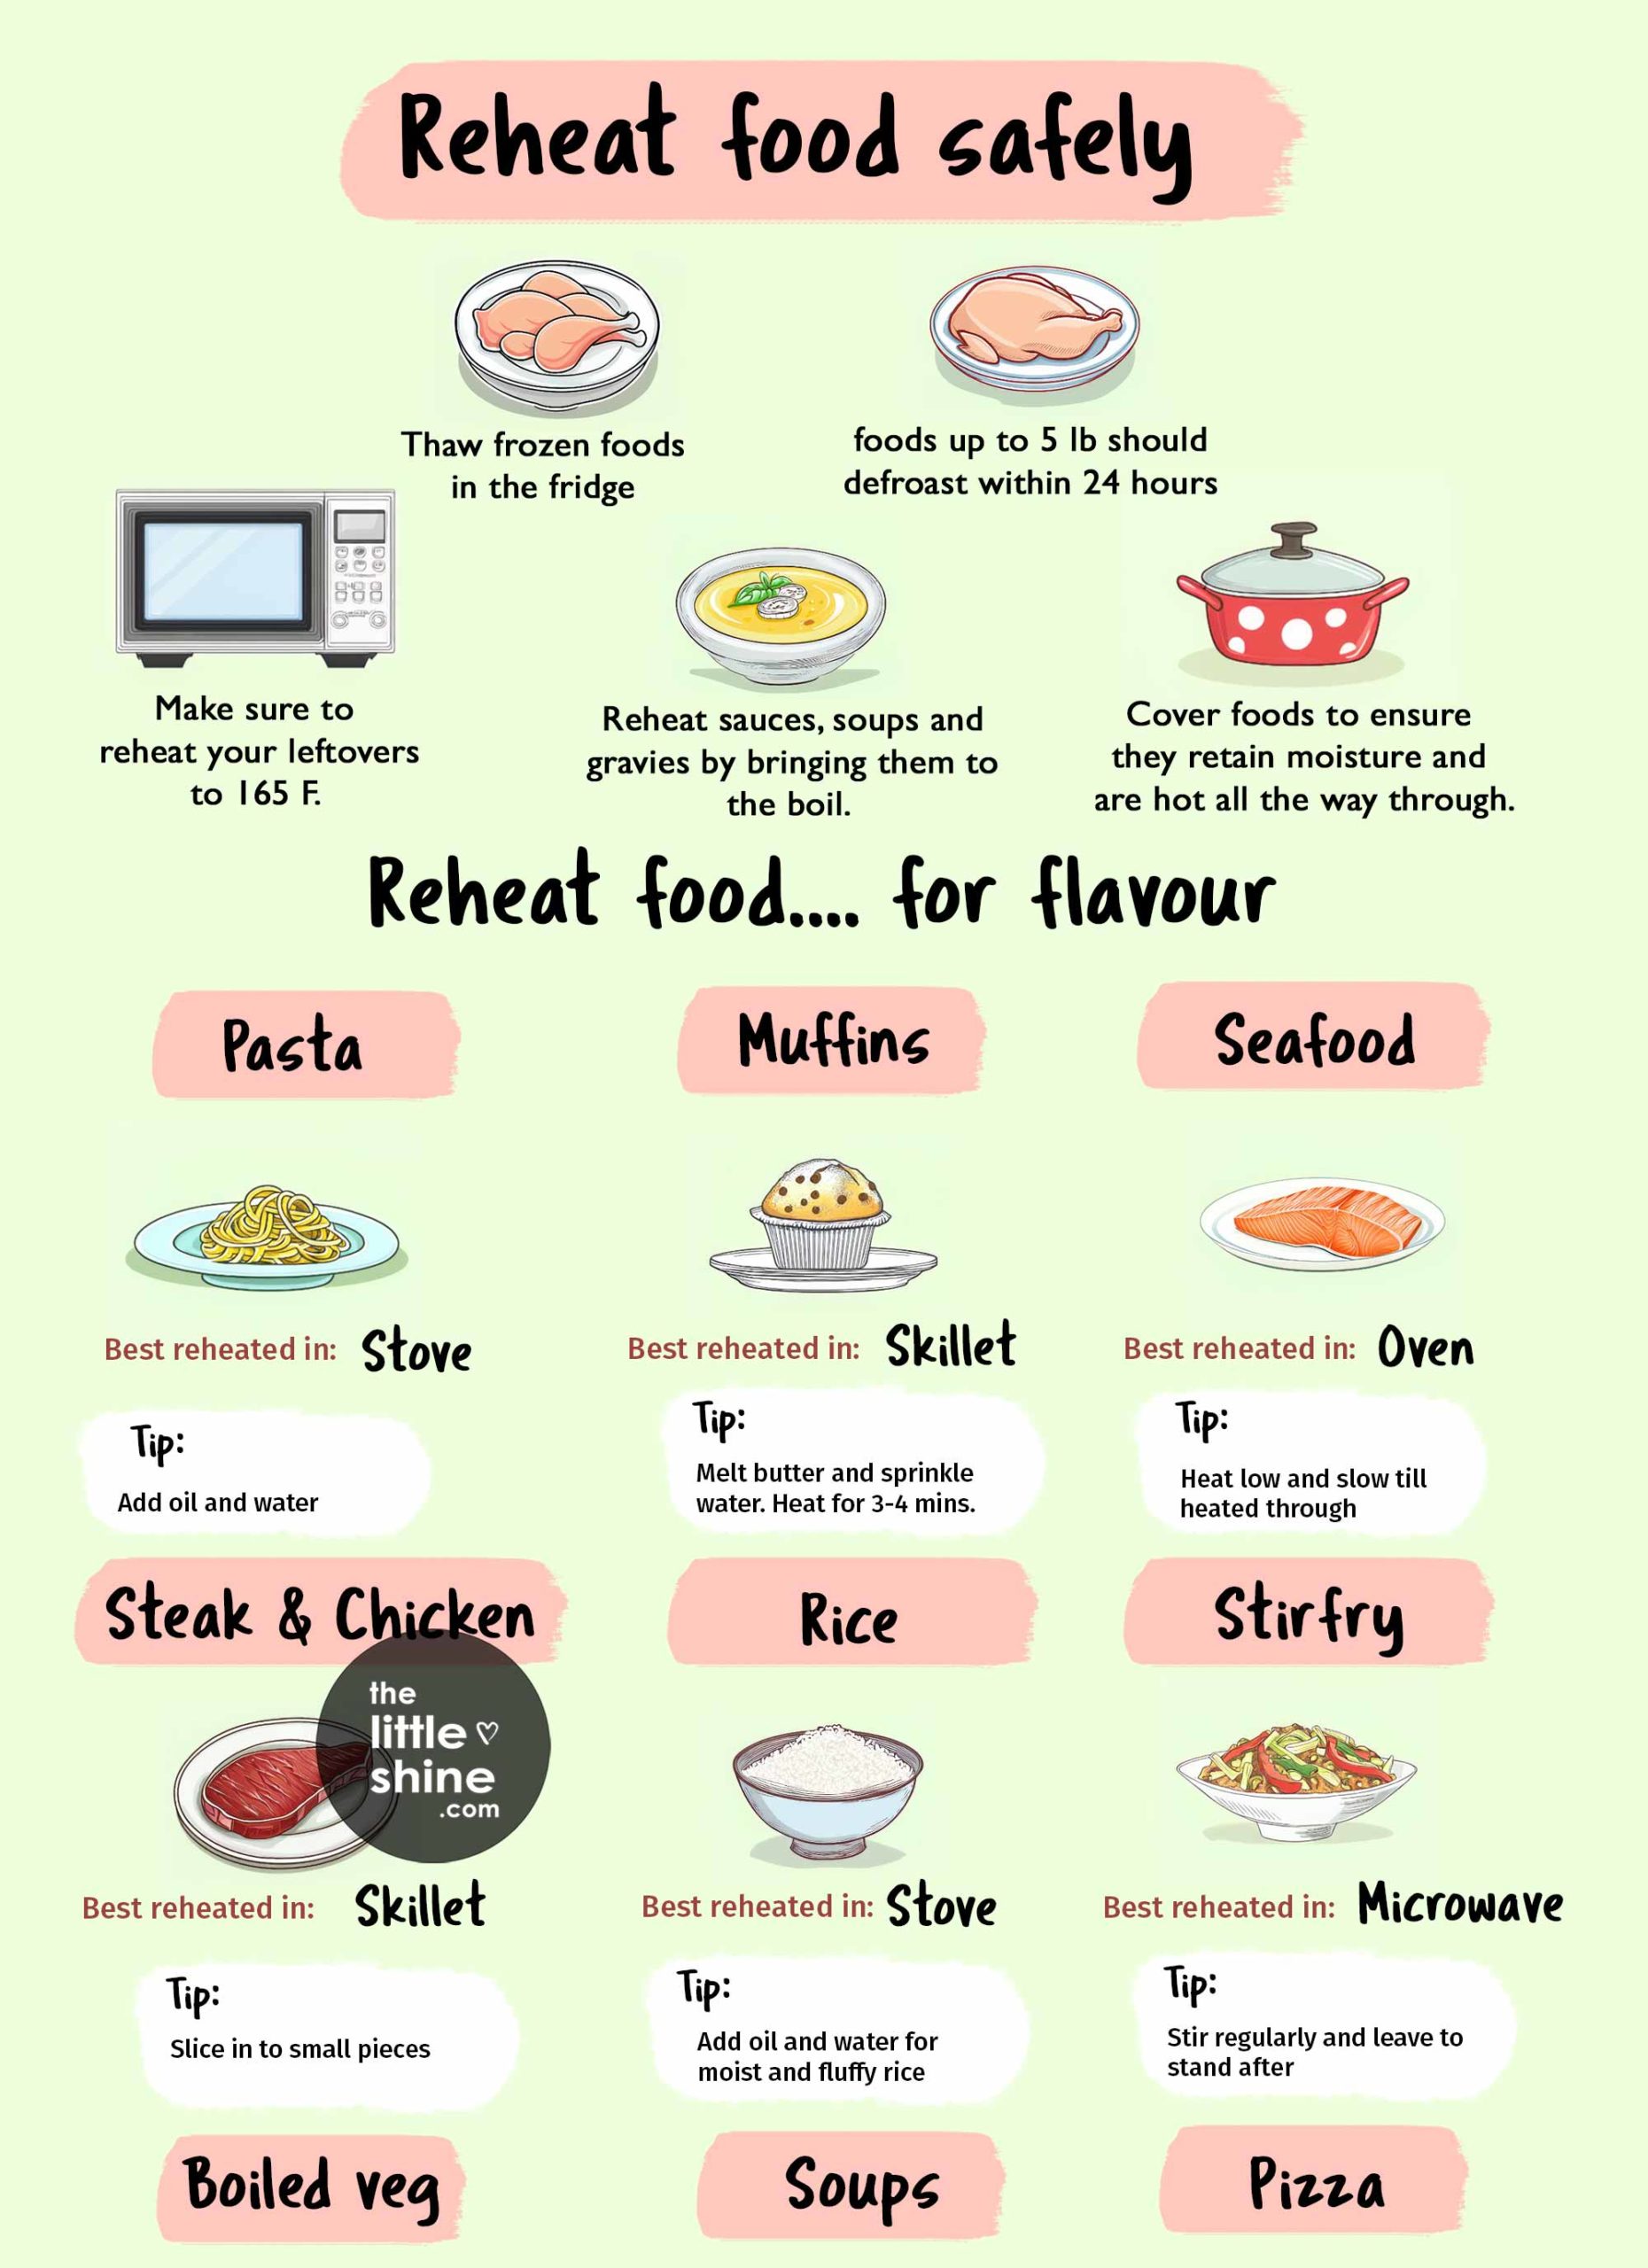 How to Safely Reheat Leftover Food